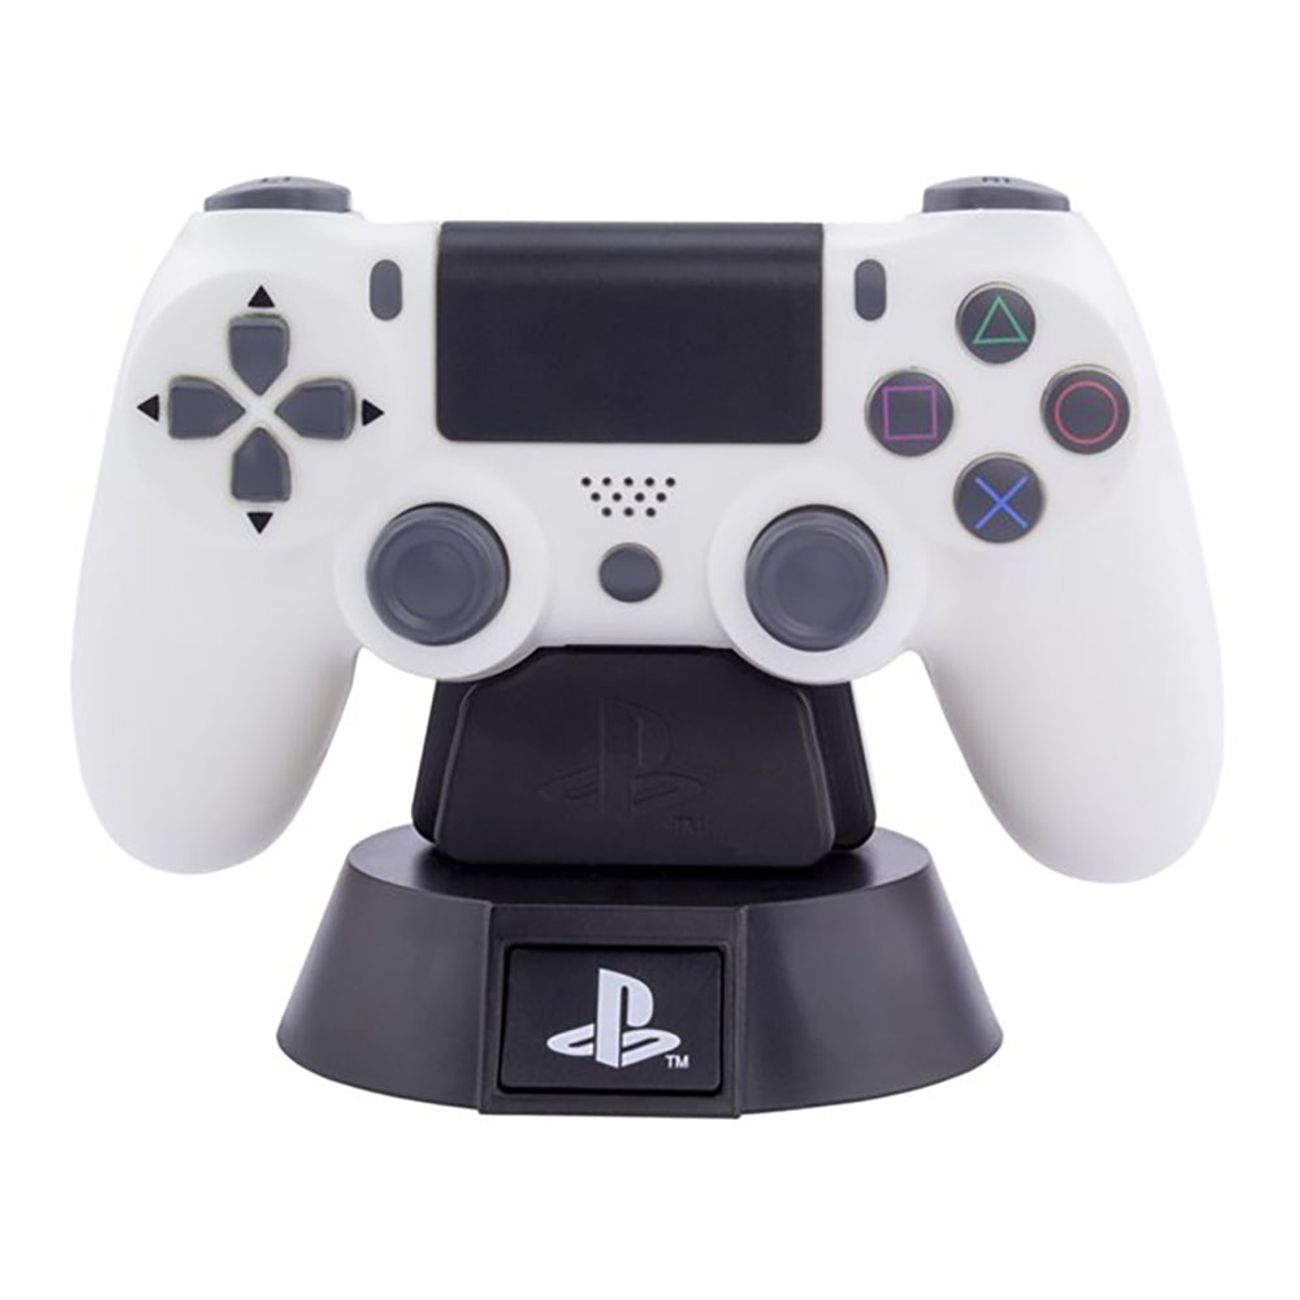 playstation-4th-gen-controller-icon-light-bdp-77415-1